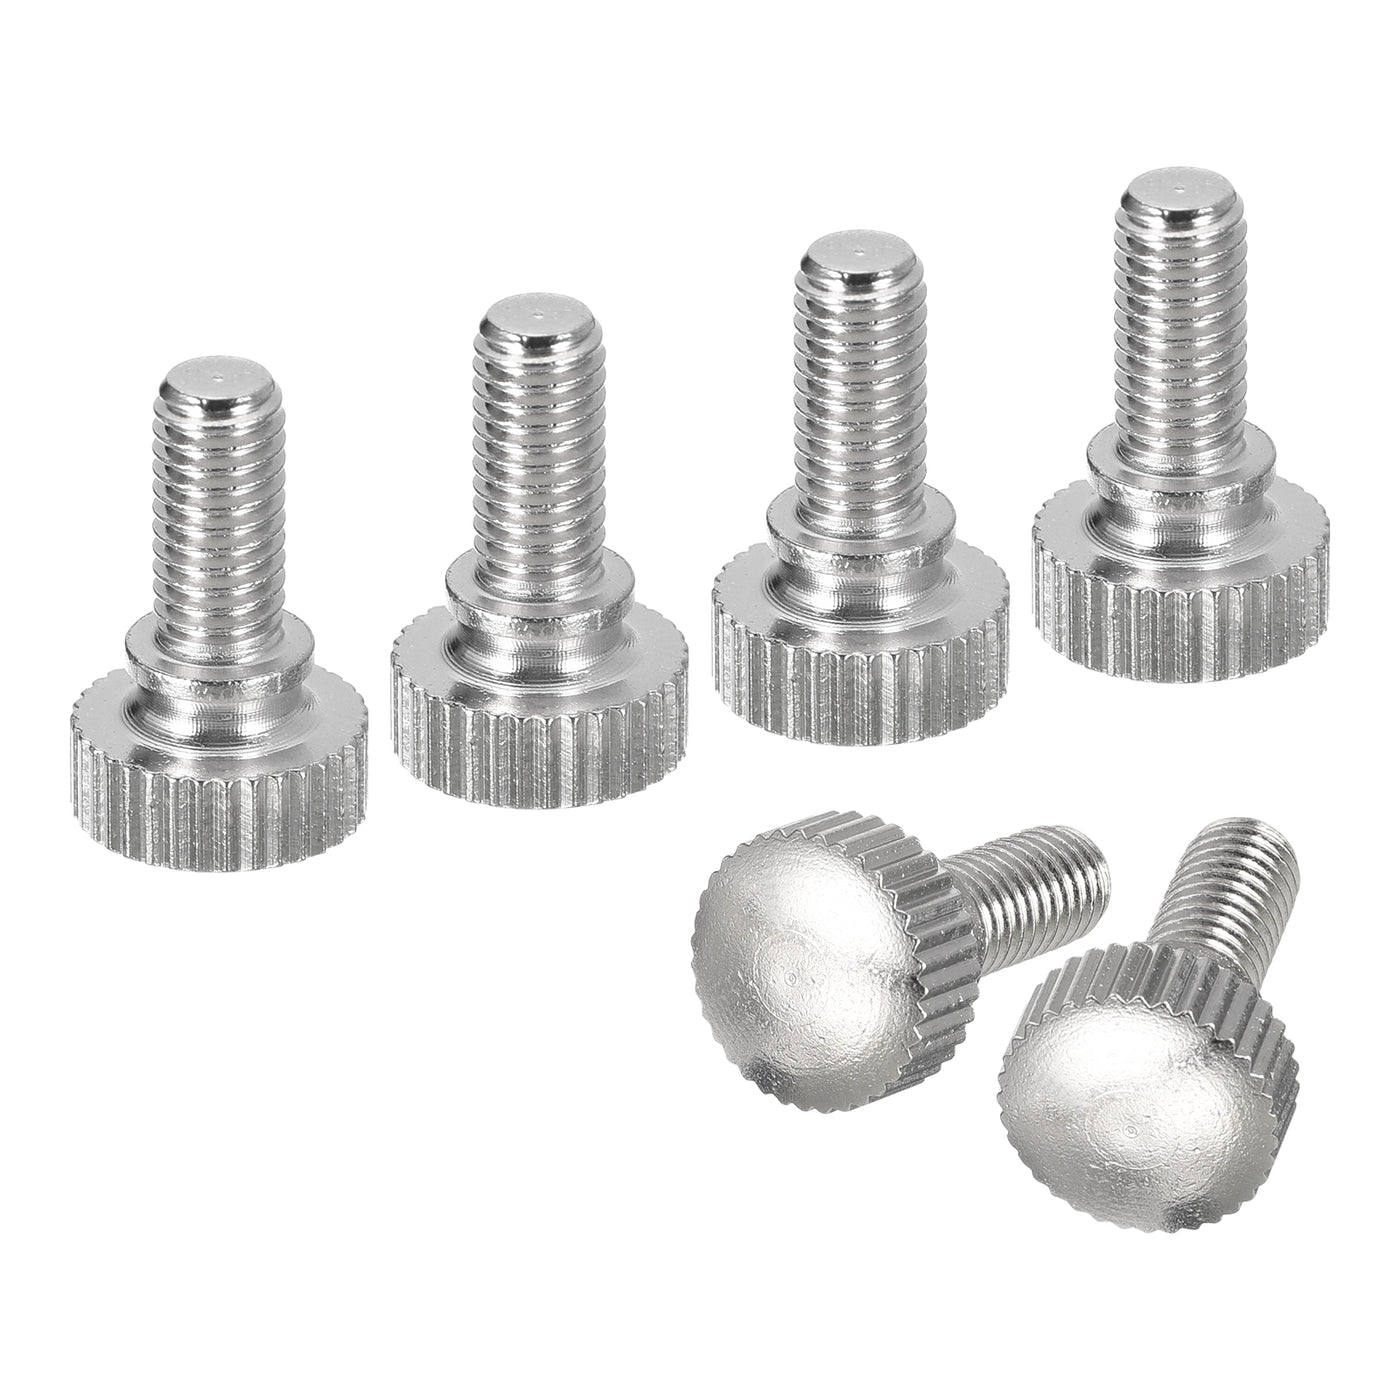 uxcell Uxcell M5x10mm Knurled Thumb Screws, 6pcs Brass Thumb Screws with Shoulder, Silver Tone